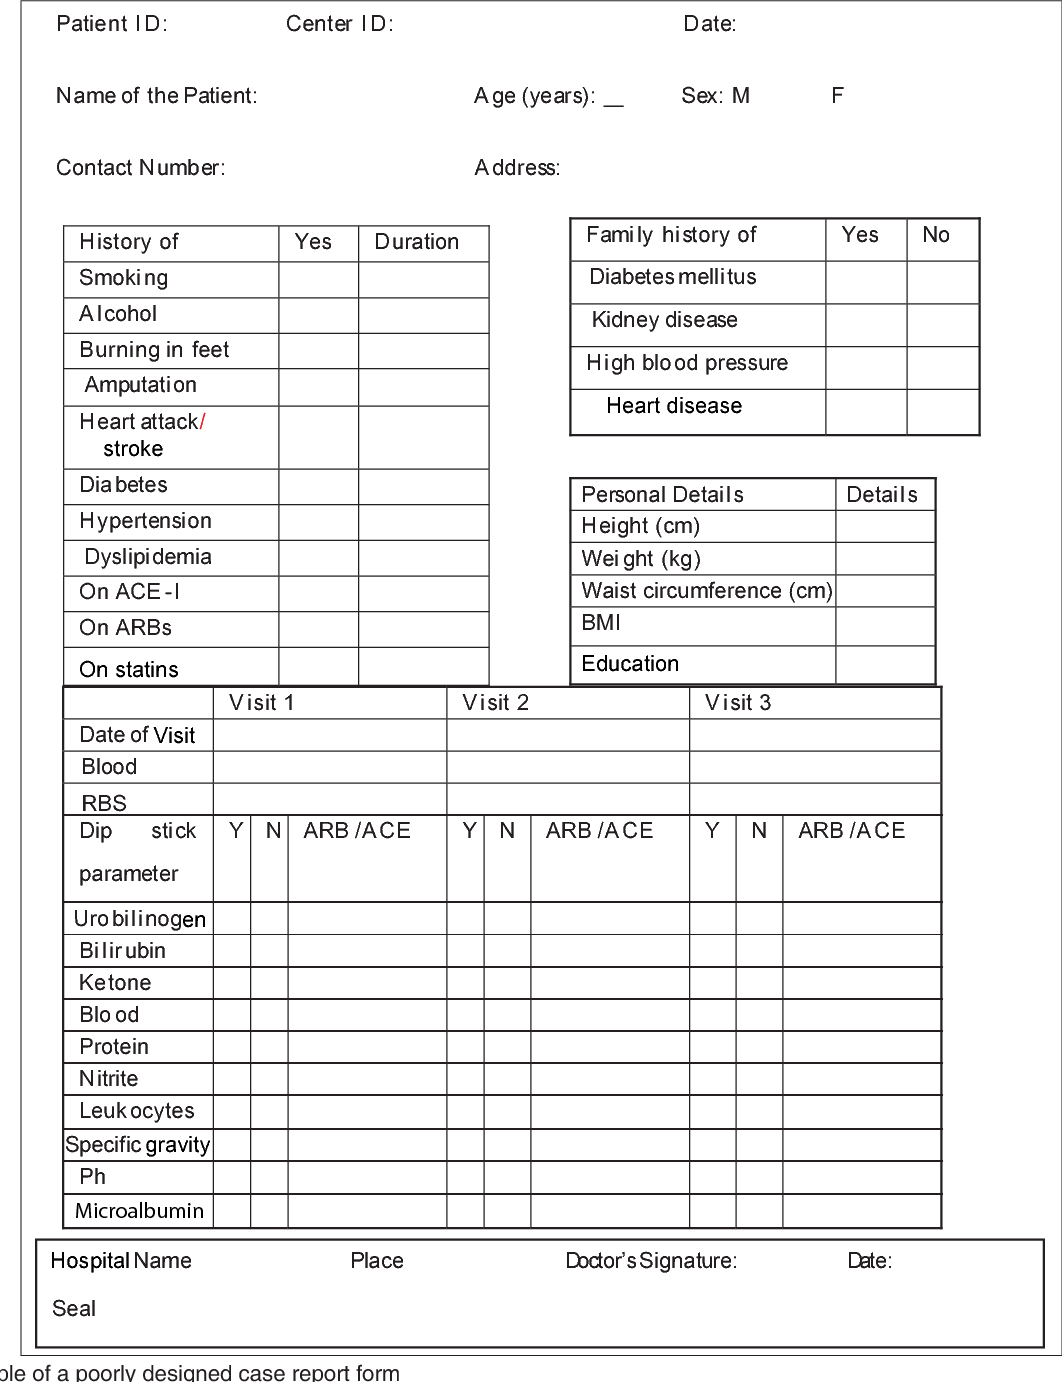 Basics Of Case Report Form Designing In Clinical Research With Regard To Case Report Form Template Clinical Trials